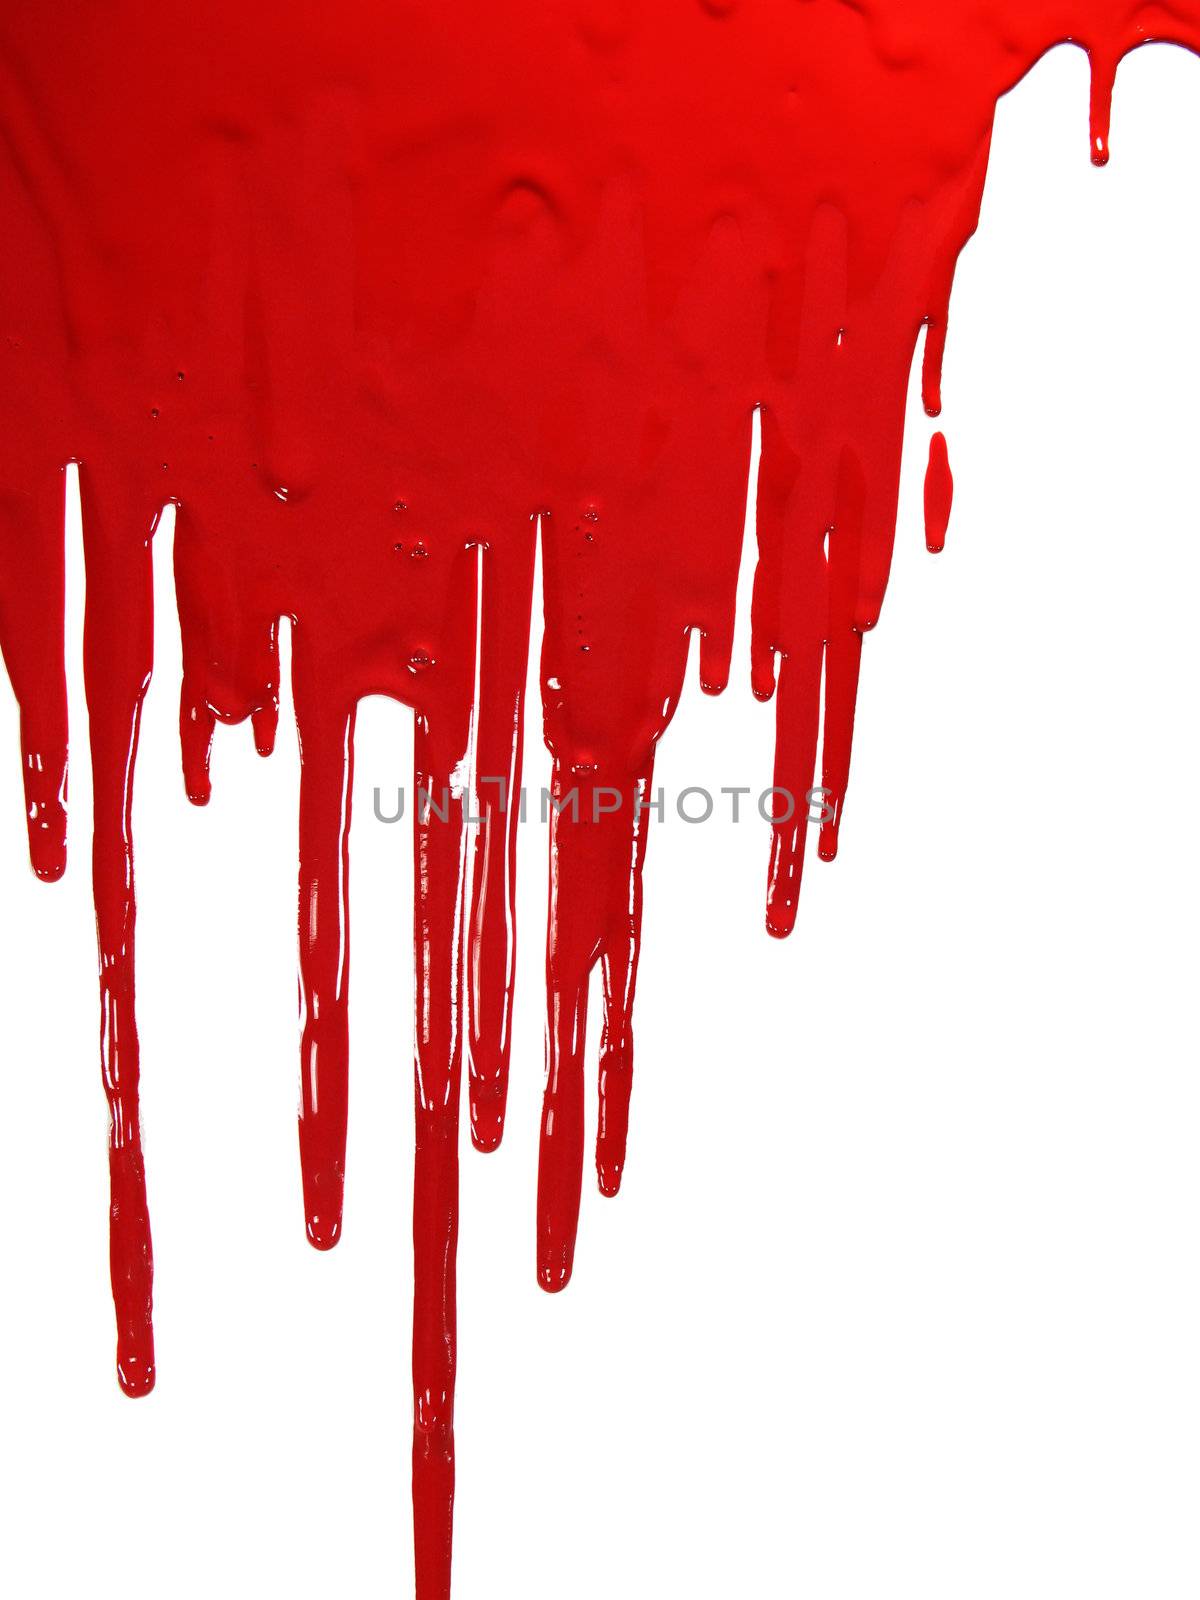 Red paint “blooding” on white.